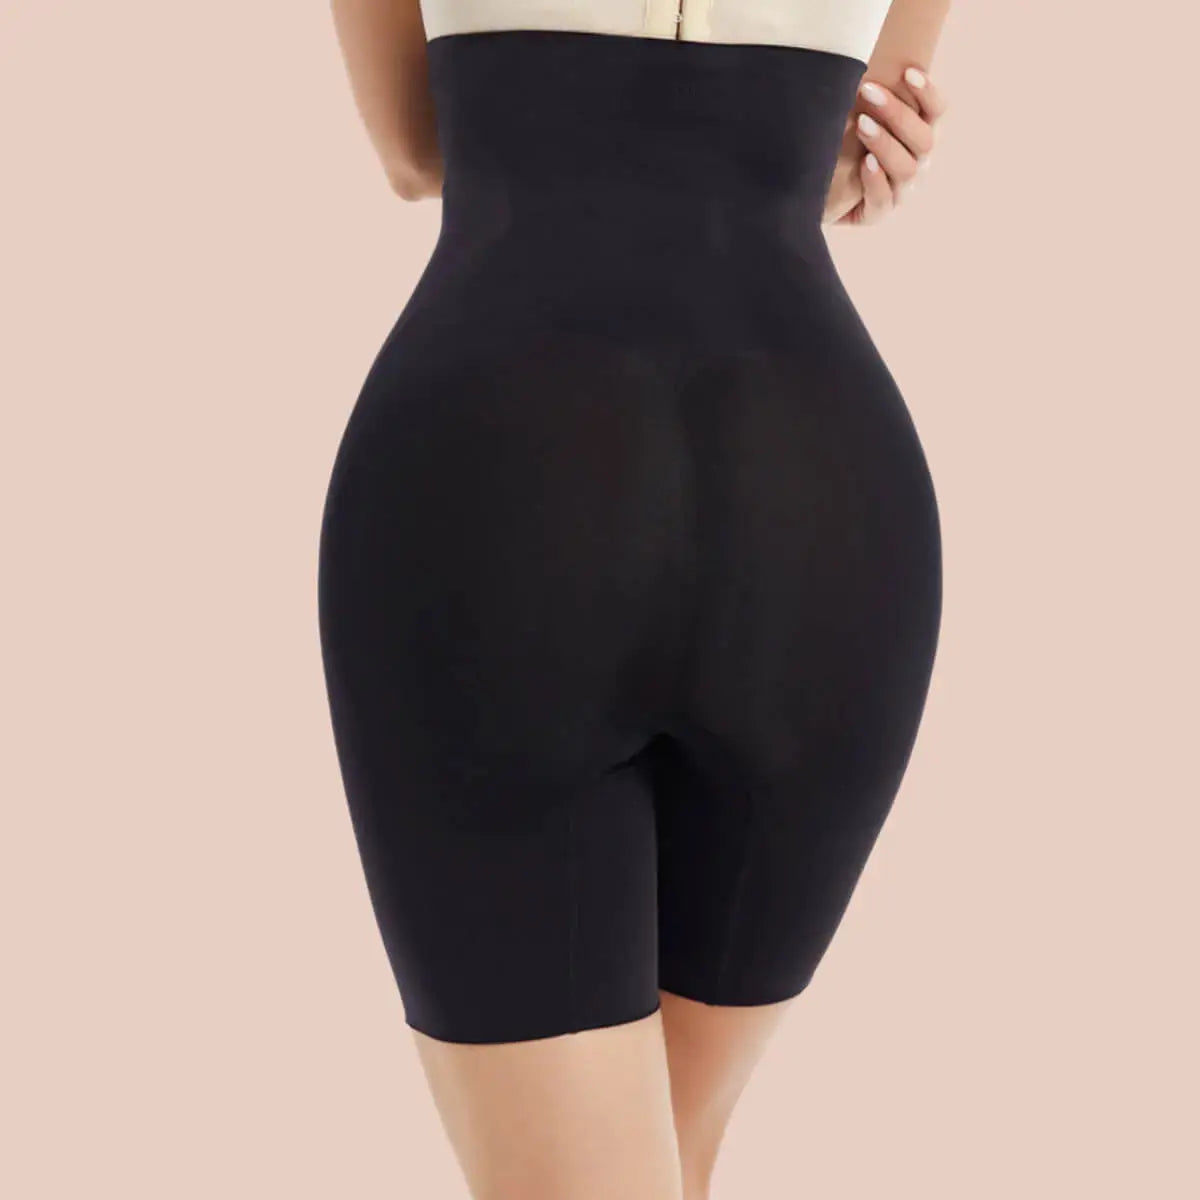 SHAPERX High Waisted Body Shaper Short Invisible Shapewear for Women